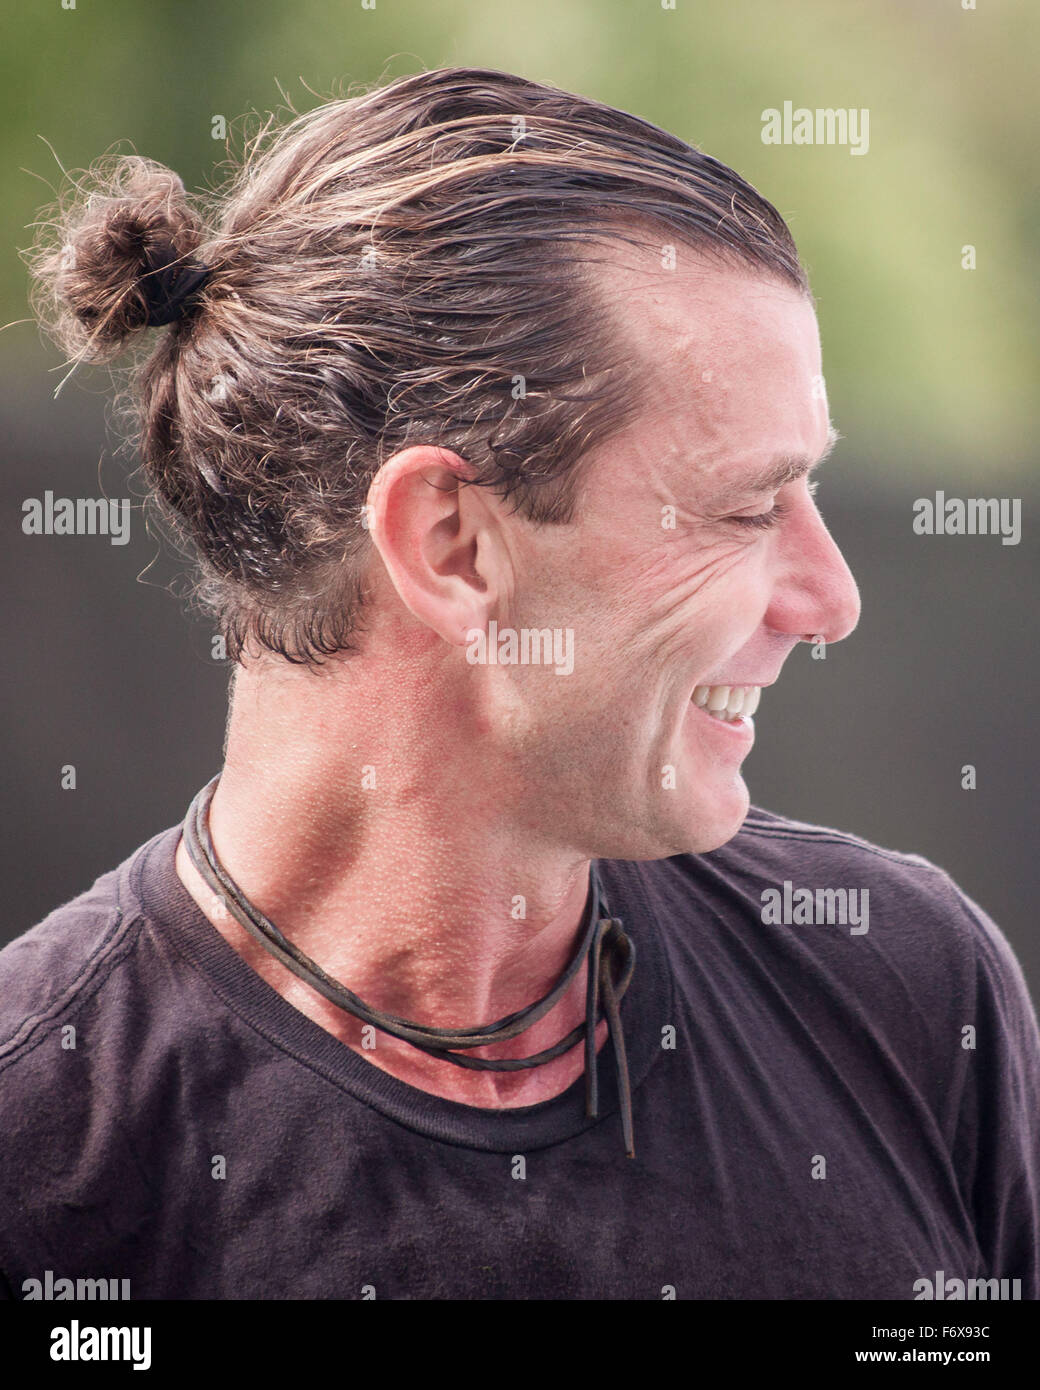 Boca Raton, Florida, US. 20th Nov, 2015. Gavin Rossdale, English musician and actor, and the lead singer and rhythm guitarist of the rock band Bush, during media day, at the 26th Annual Chris Evert/Raymond James Pro-Celebrity Tennis Classic at the Boca Raton Resort & Club in Florida. Chris Evert Charities has raised almost $ 22 million for Florida's most at-risk children. Credit:  Arnold Drapkin/ZUMA Wire/Alamy Live News Stock Photo